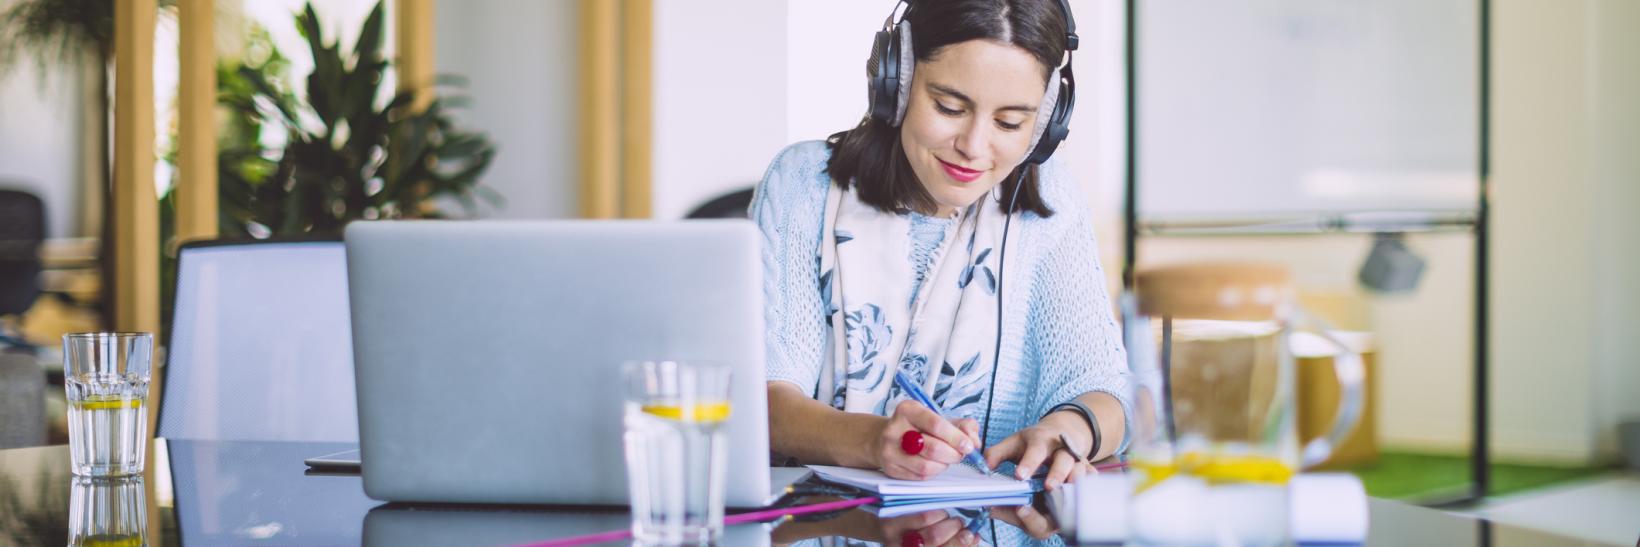 Woman wearing headphones at a computer